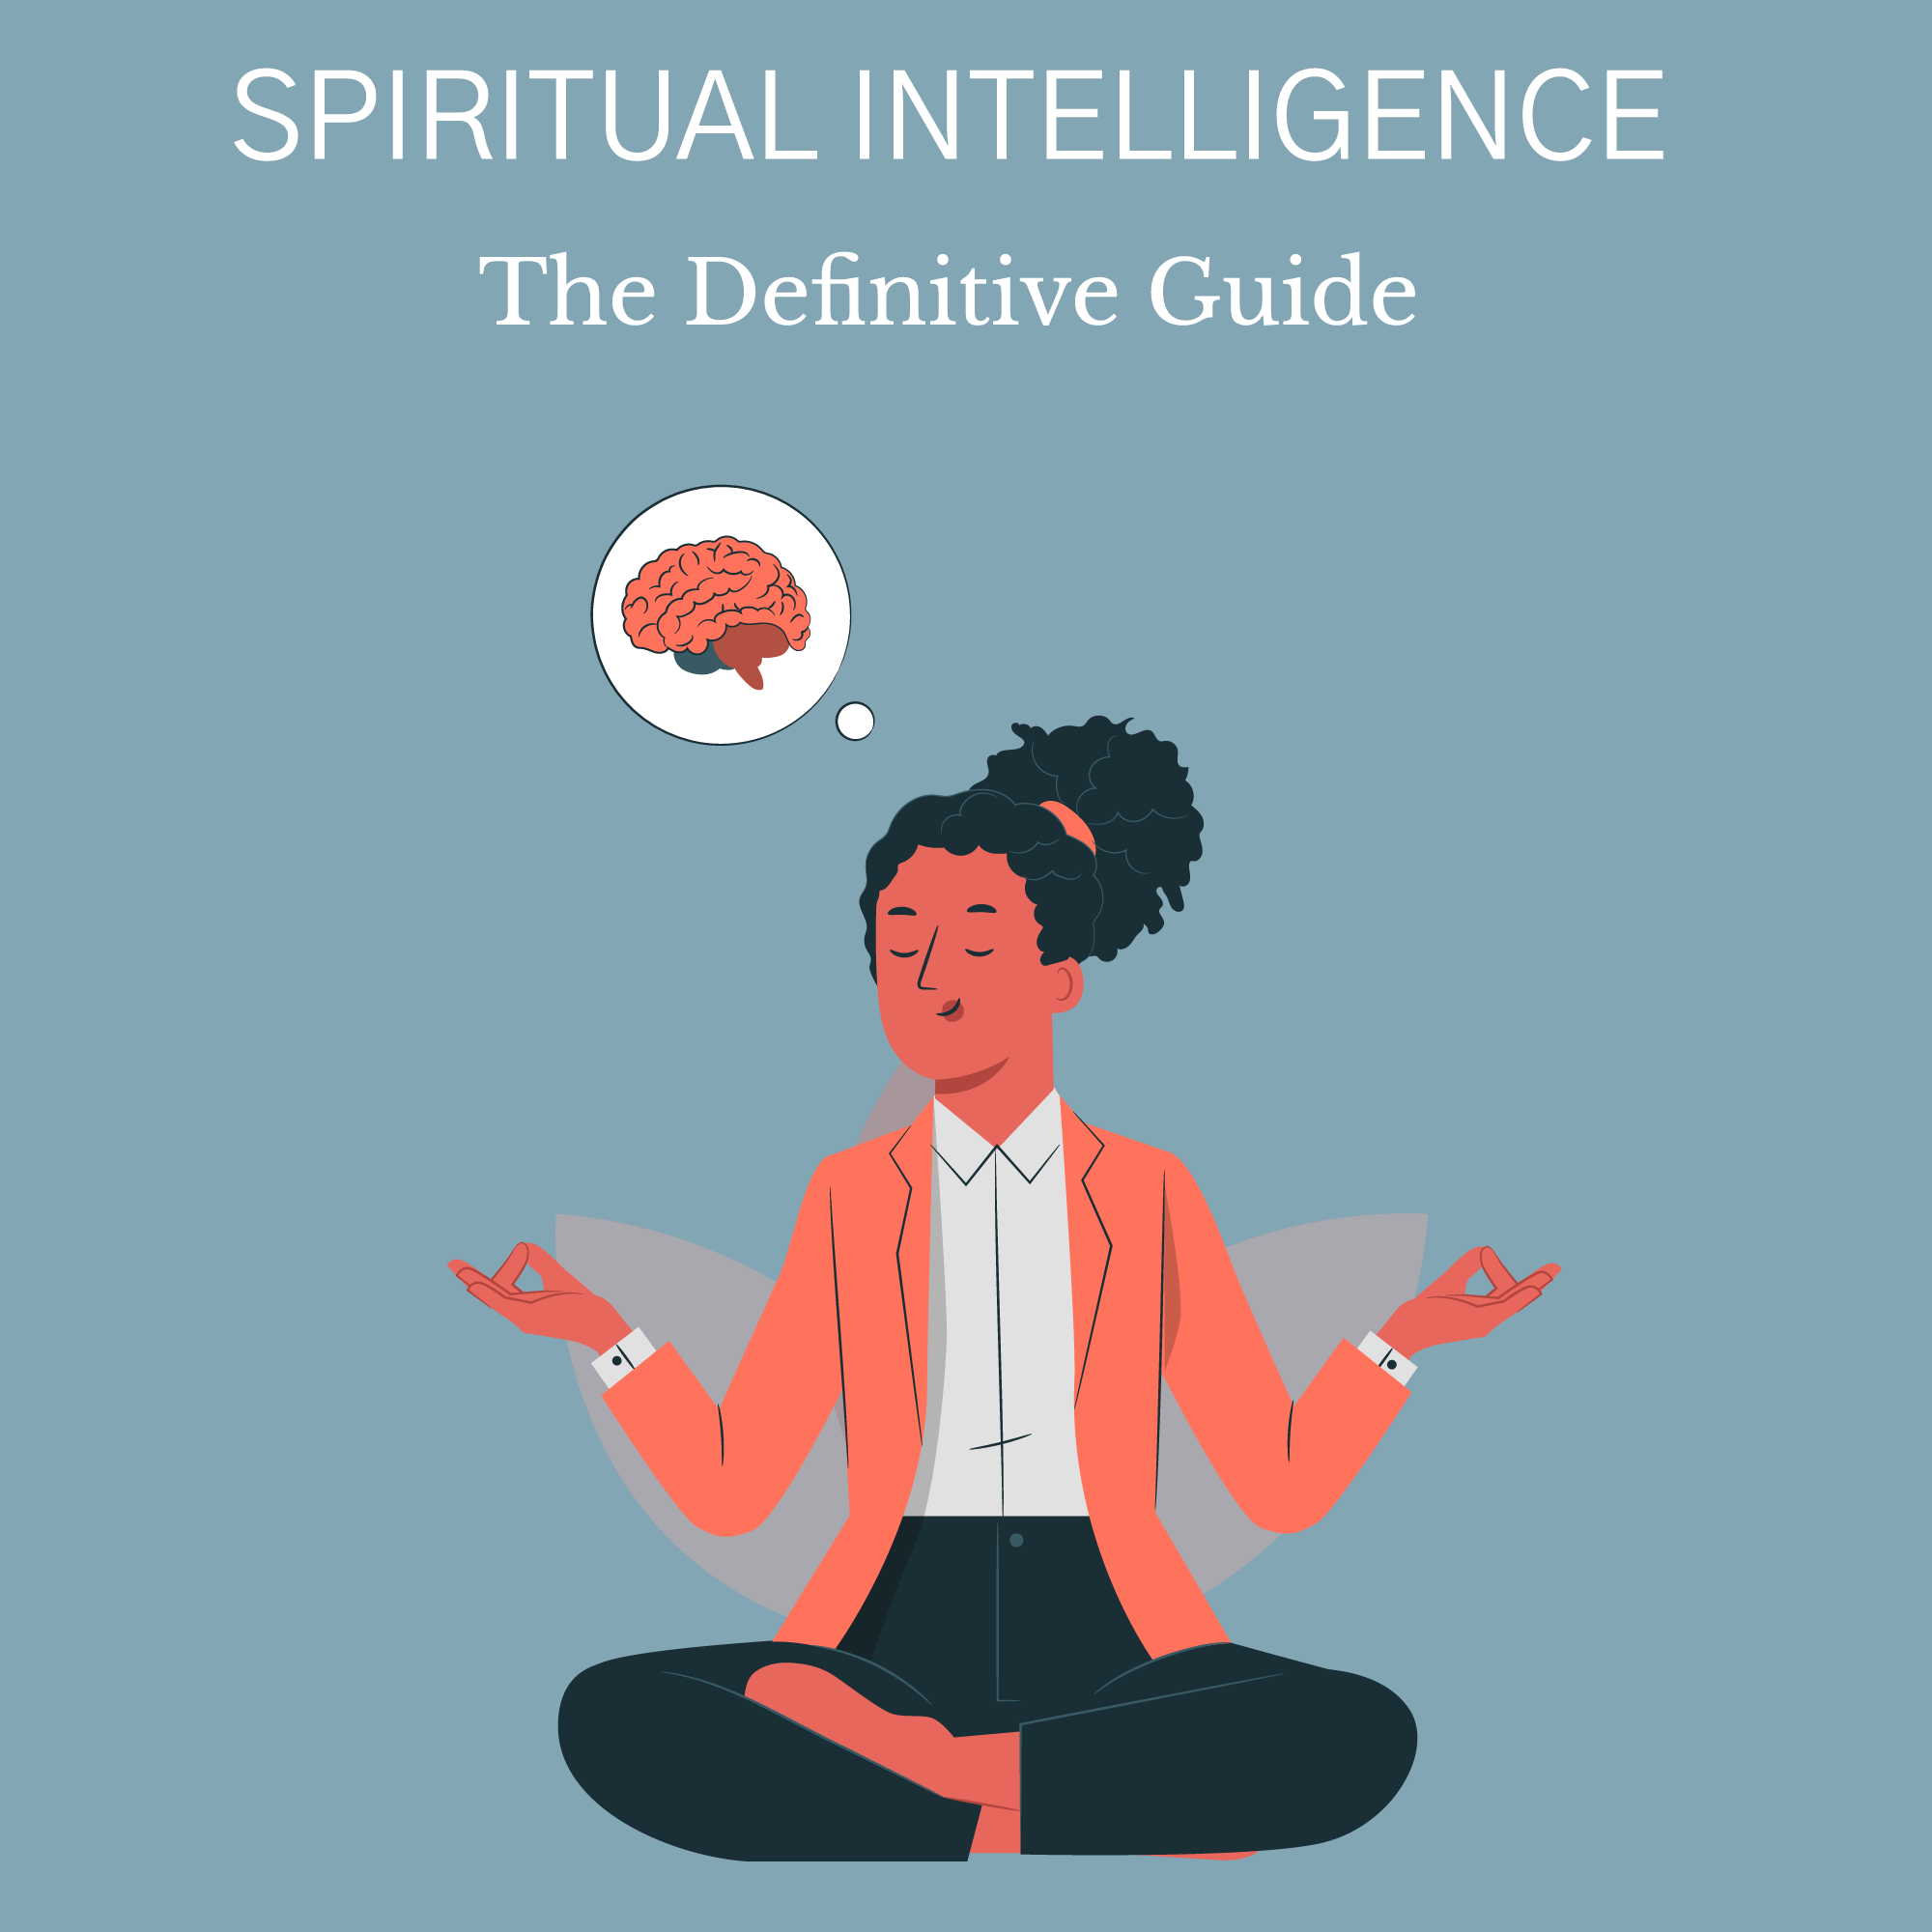 Spiritual Intelligence [The Definitive Guide] Spiritual Intelligence